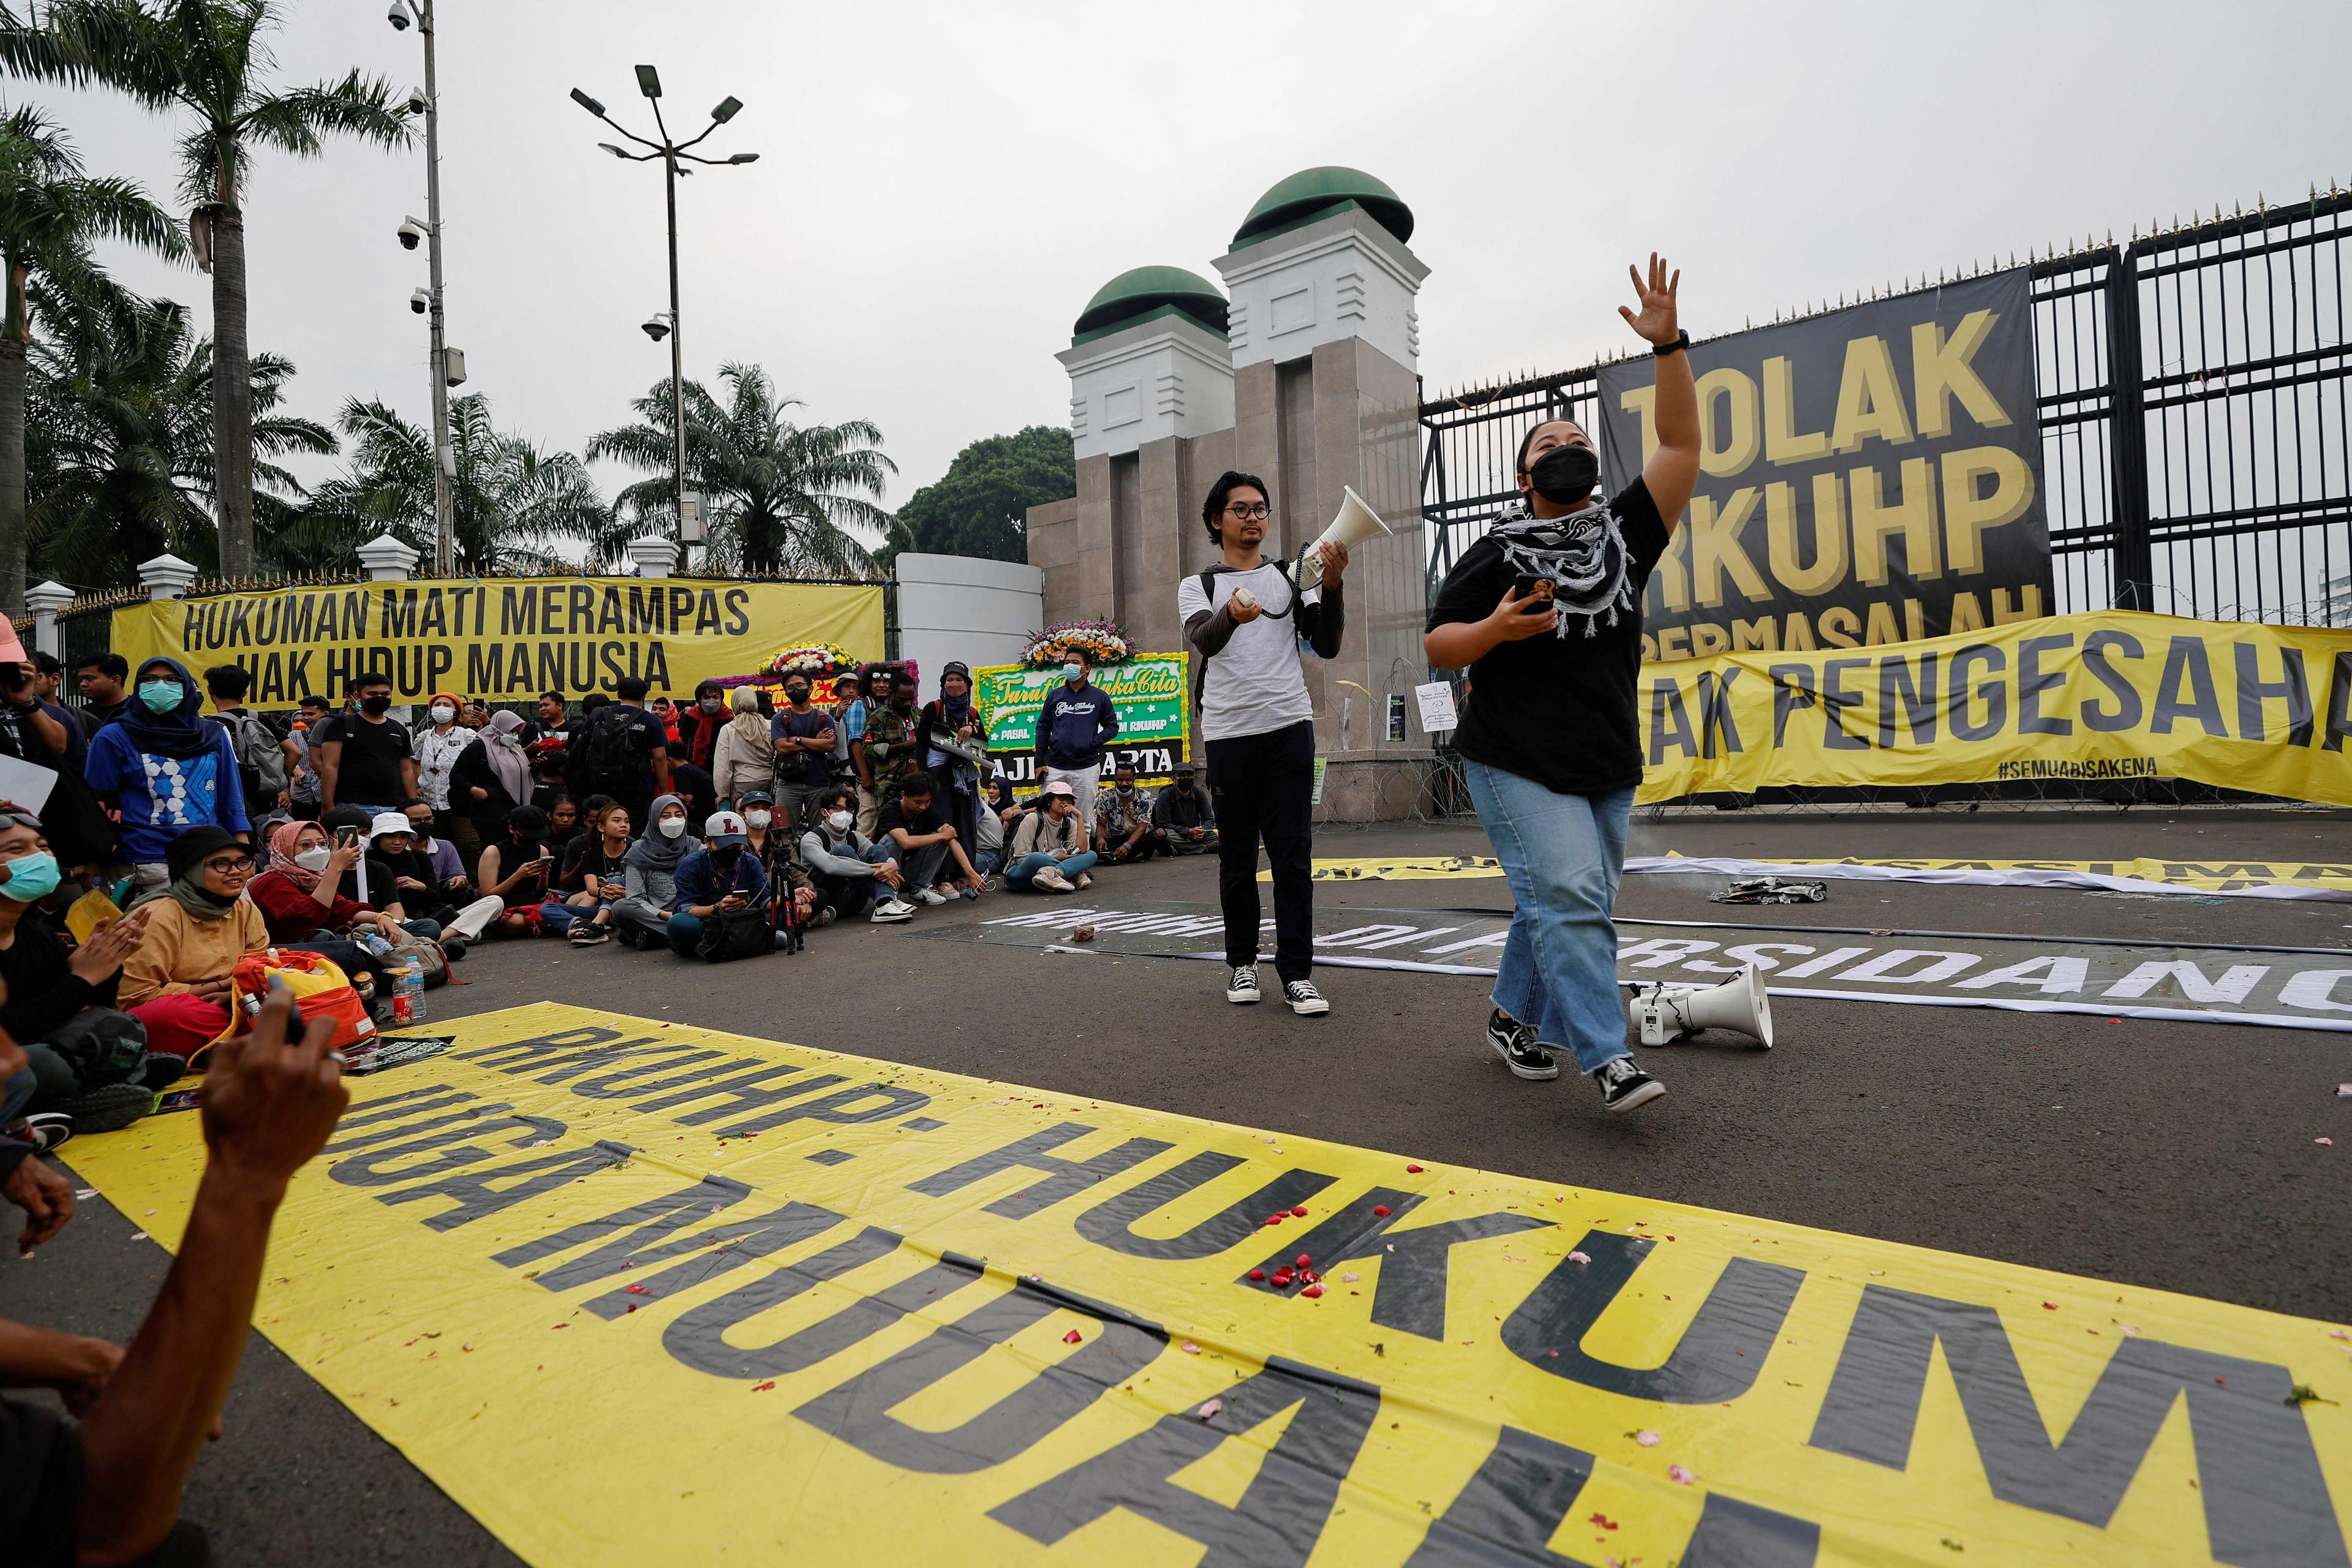 An activist shouts slogans during a protest outside the Indonesian Parliament buildings in Jakarta, Indonesia, Dec 5. Photo: Reuters